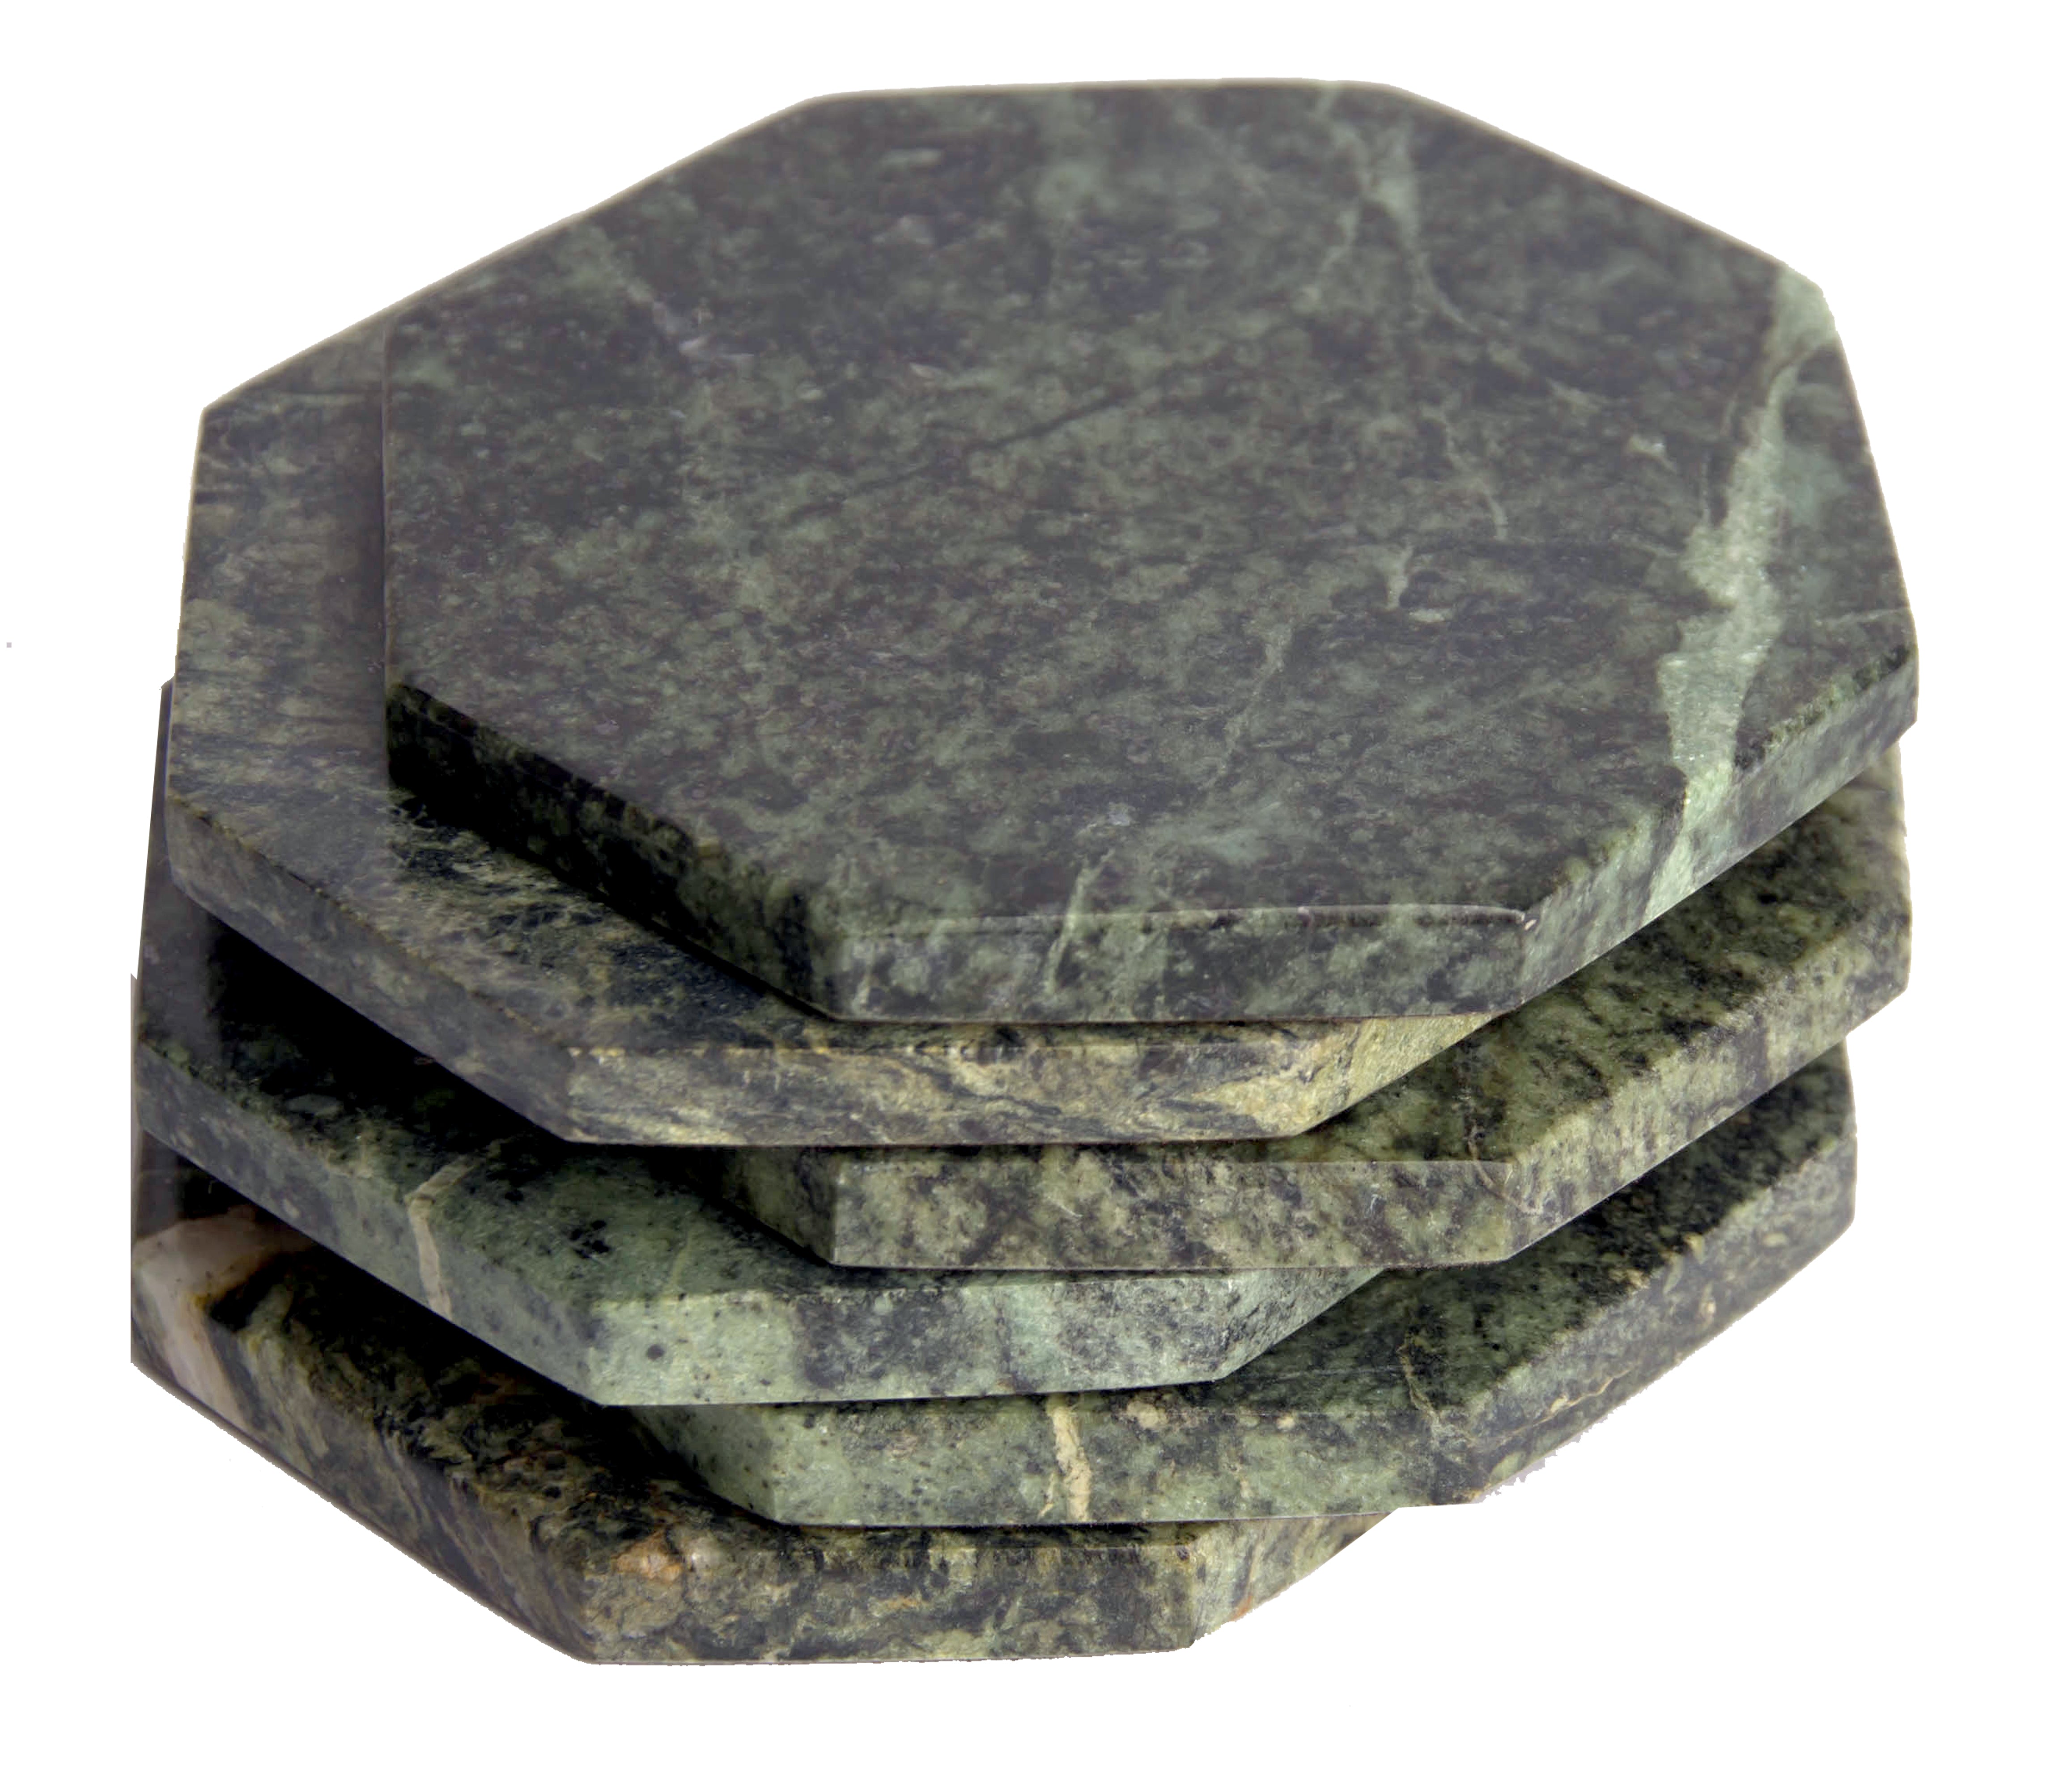 Set of 6 - Green Marble Stone Coasters Polished Coasters 3.5 Inches ( 9 cm) in Diameter Protection from Drink Rings -CraftsOfEgypt